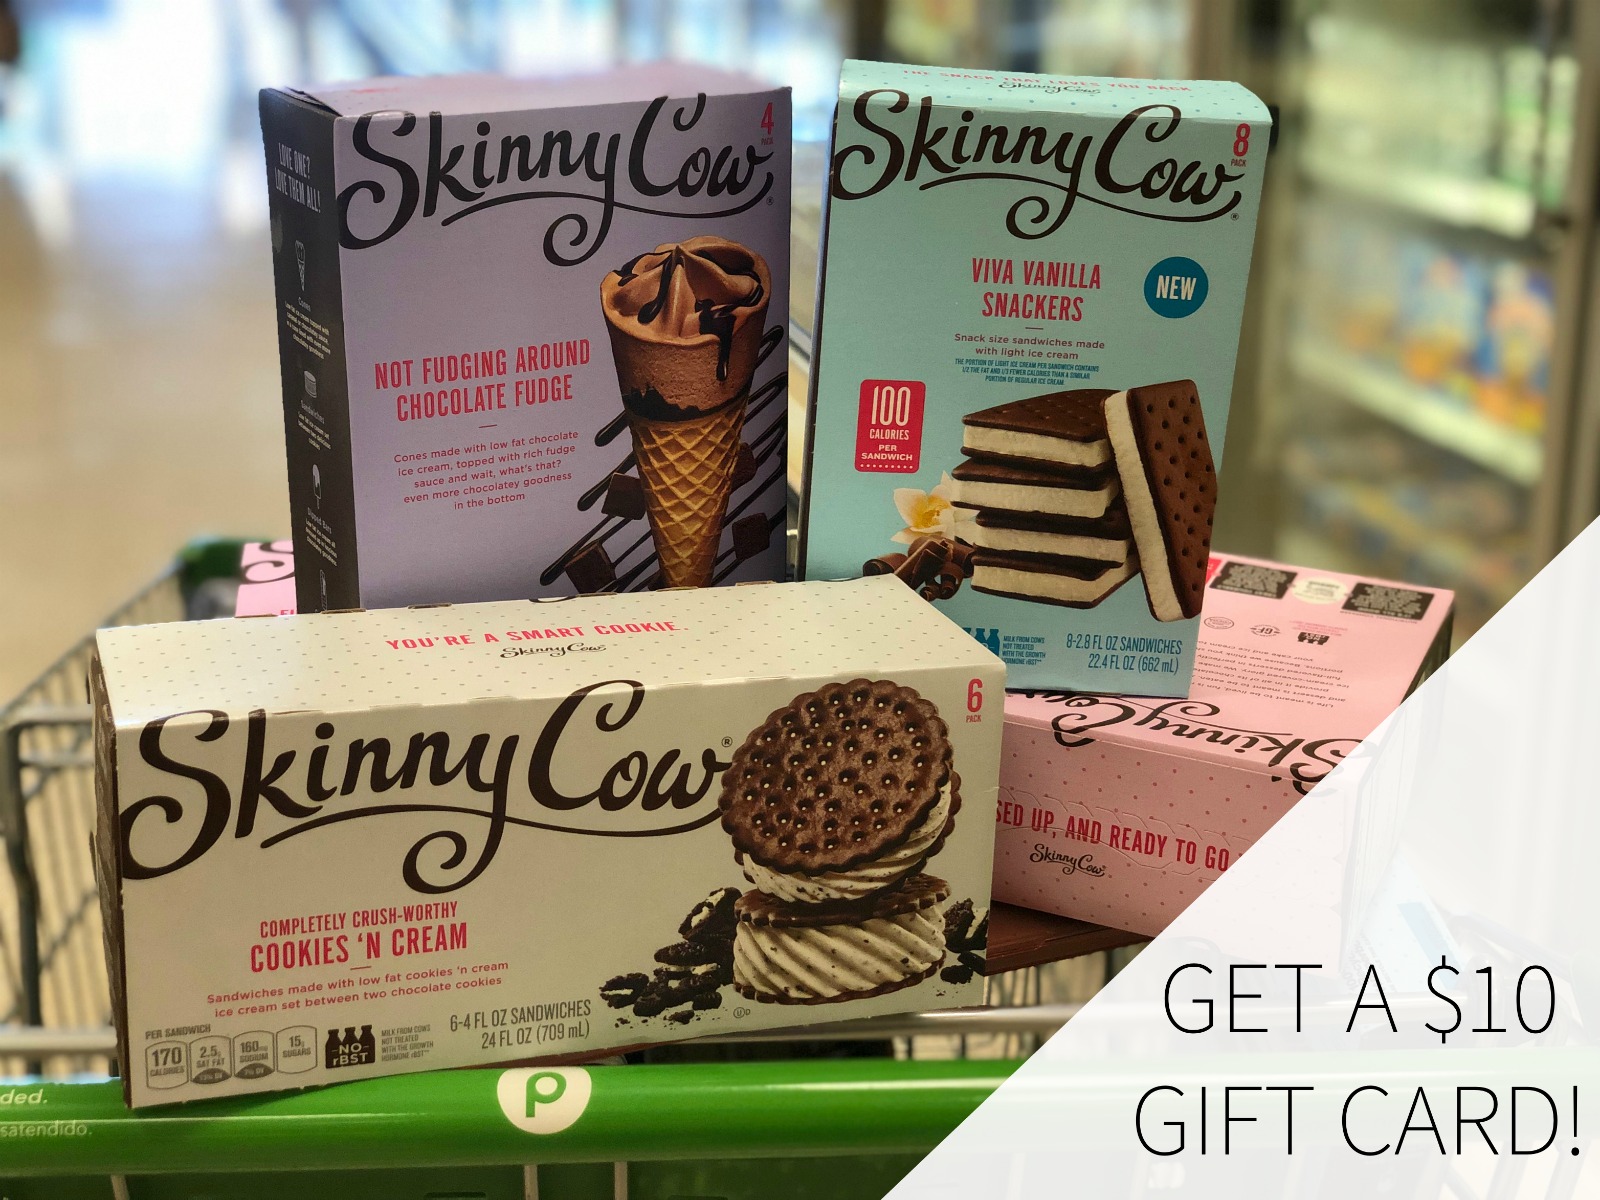 Get A $10 Gift Card With The Skinny Cow Rewards Program – Program Ends In May!